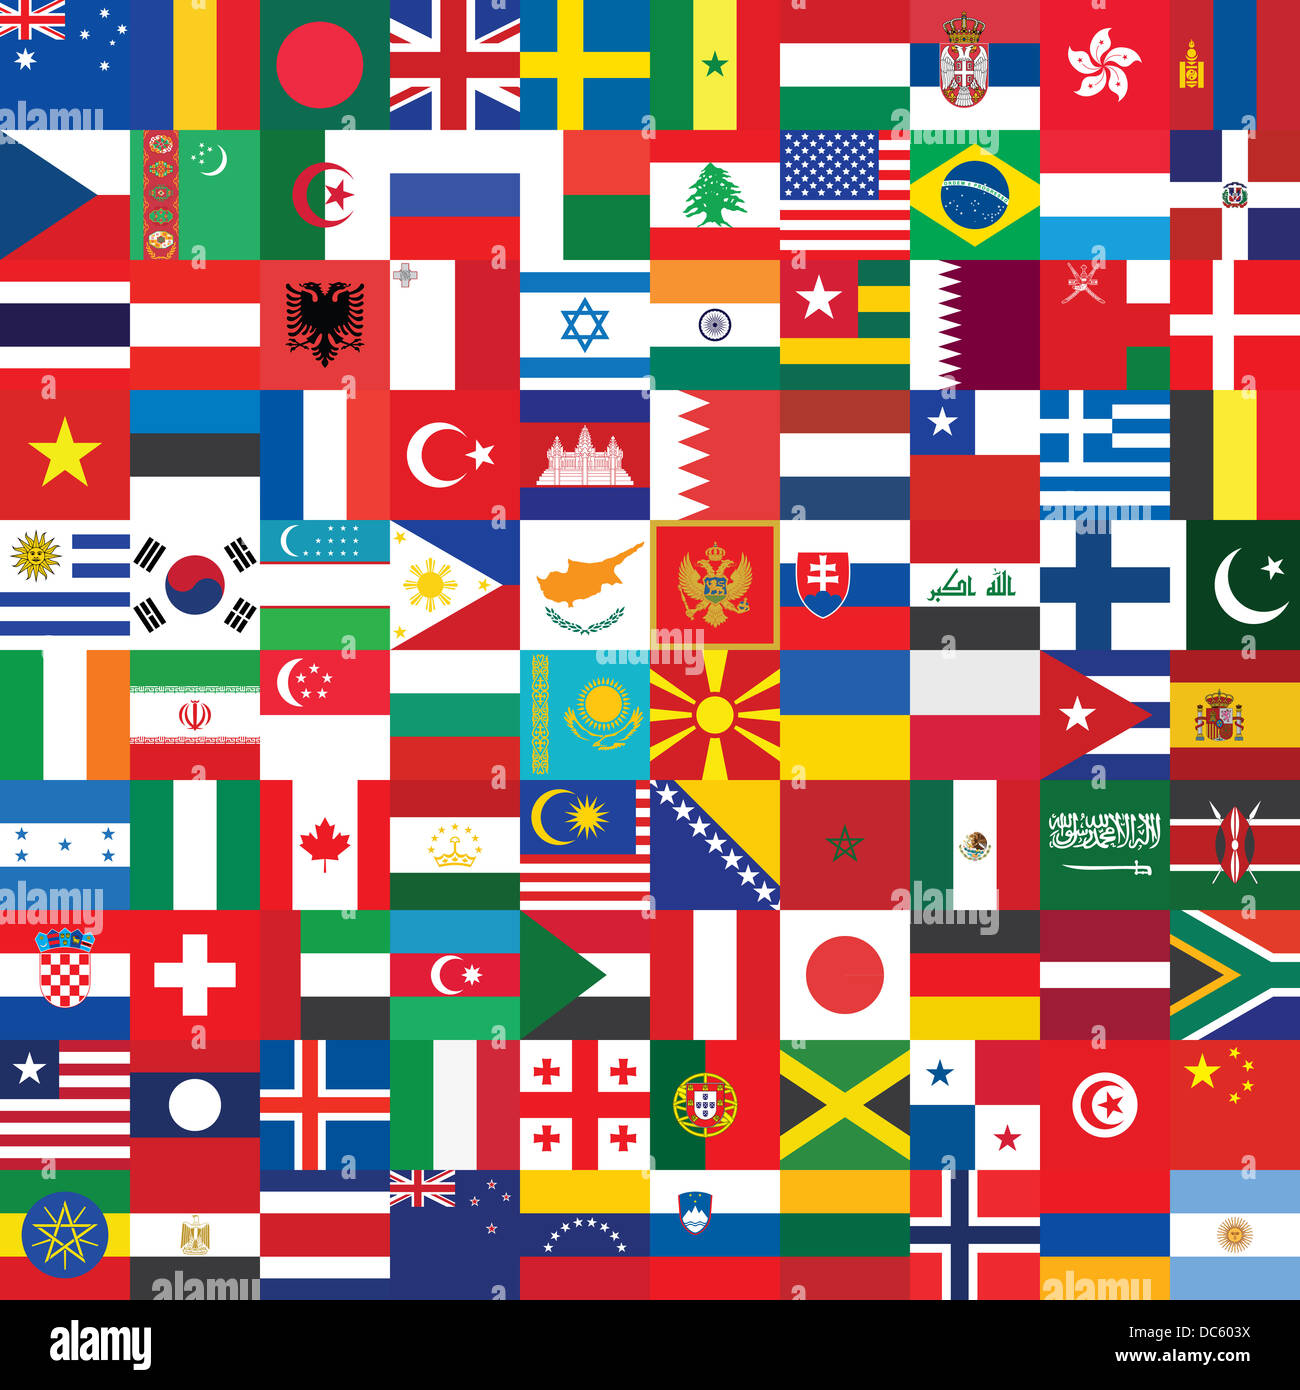 square background made of flag icons Stock Photo